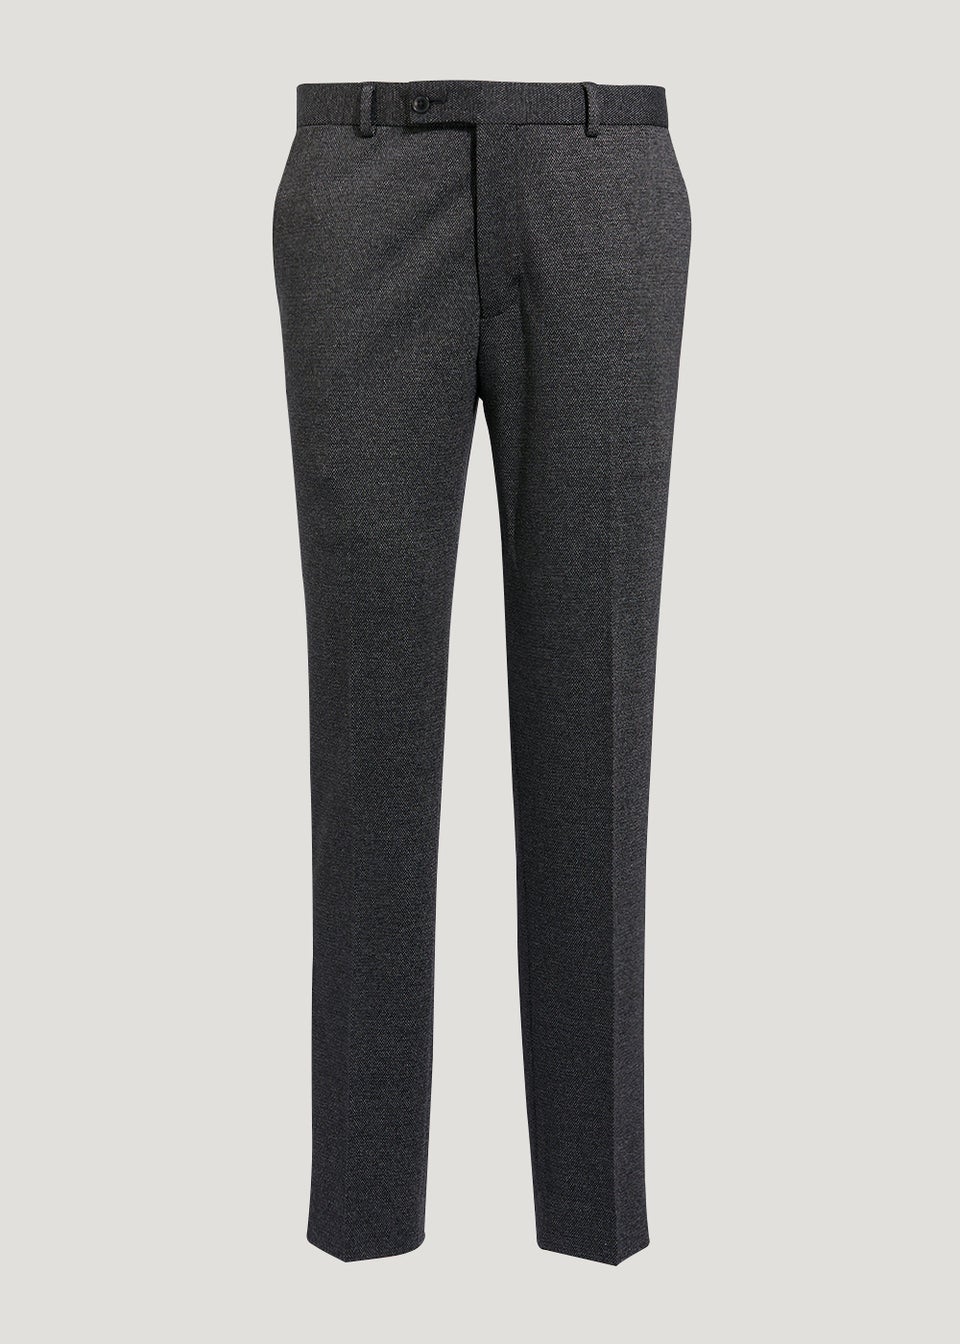 Buy Tuxedo Trousers 316yrs from Next Thailand